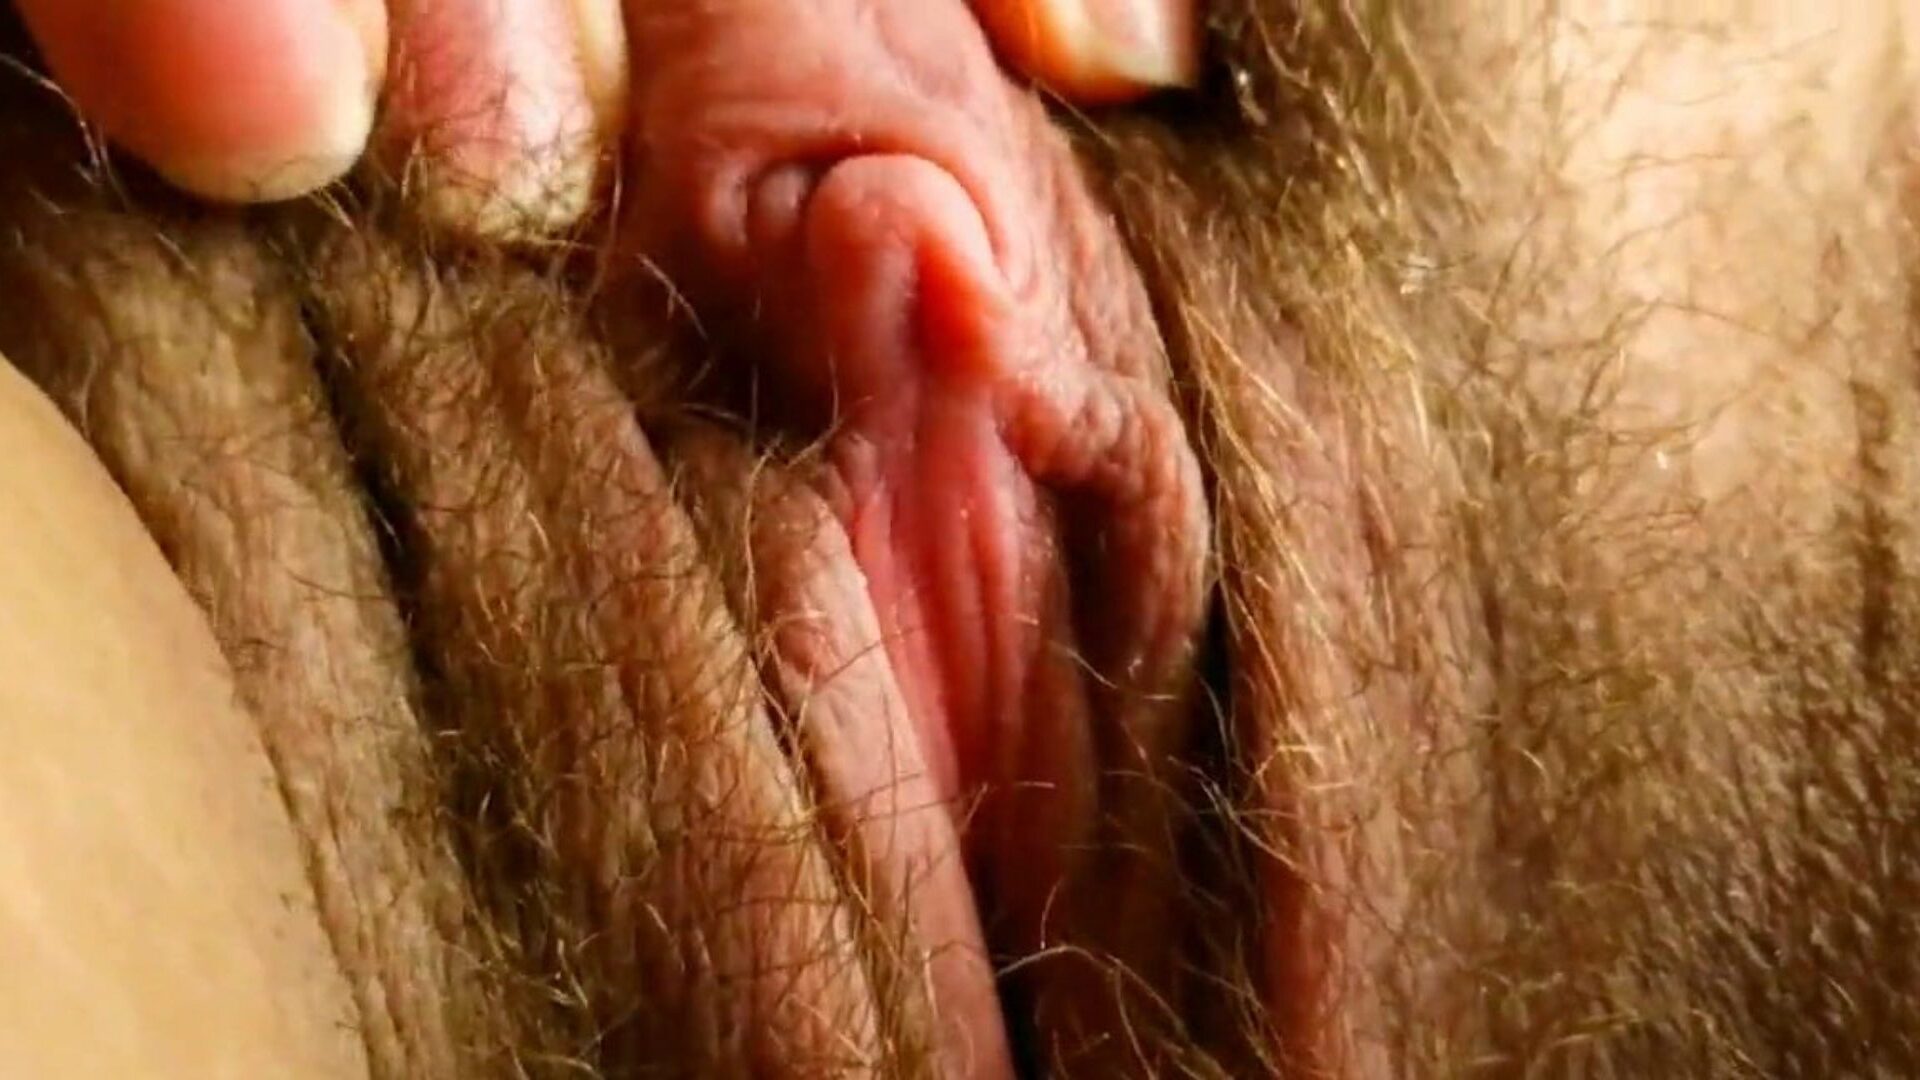 This is the Sexiest Big Clit You Have Ever Seen: HD Porn af Watch This is the Sexiest Big Clit You Have Ever Seen clip on xHamster - the ultimate collection of free-for-all Brazilian Hairy HD hard-core pornography tube videos